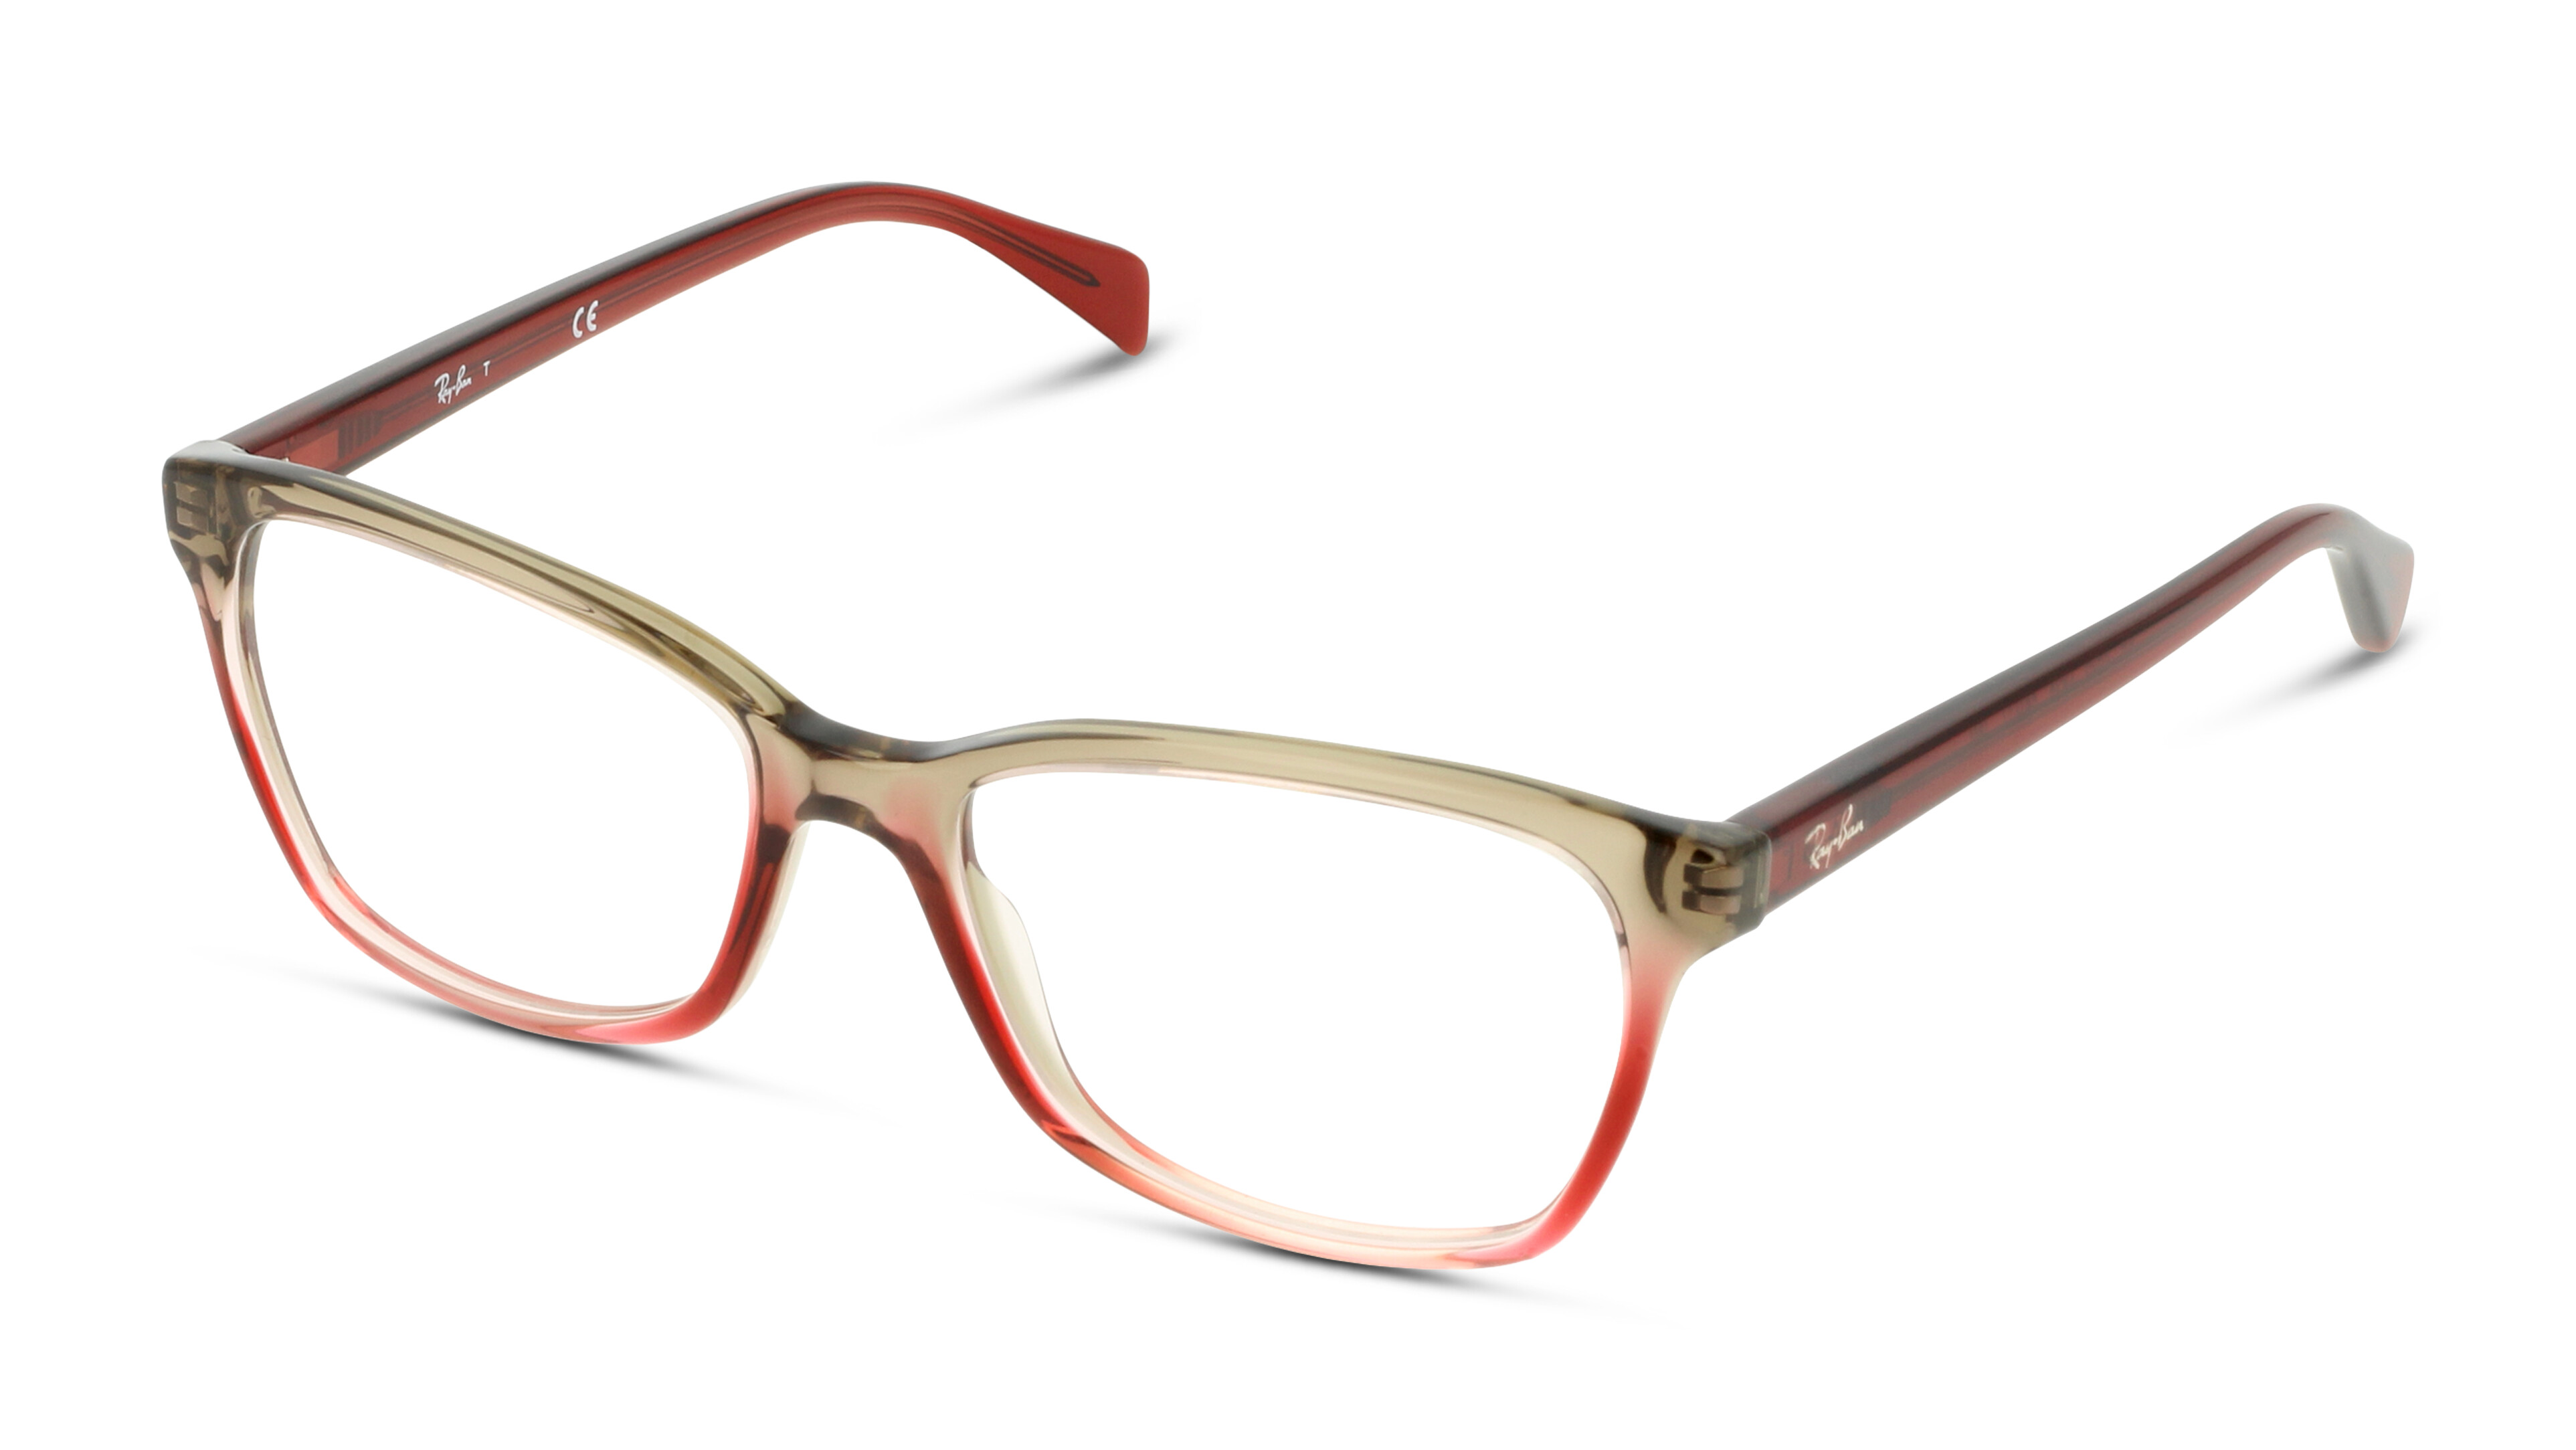 Angle_Left01 Ray-Ban OPTICS 0RX5362 5835 Brille Transparent, Rot